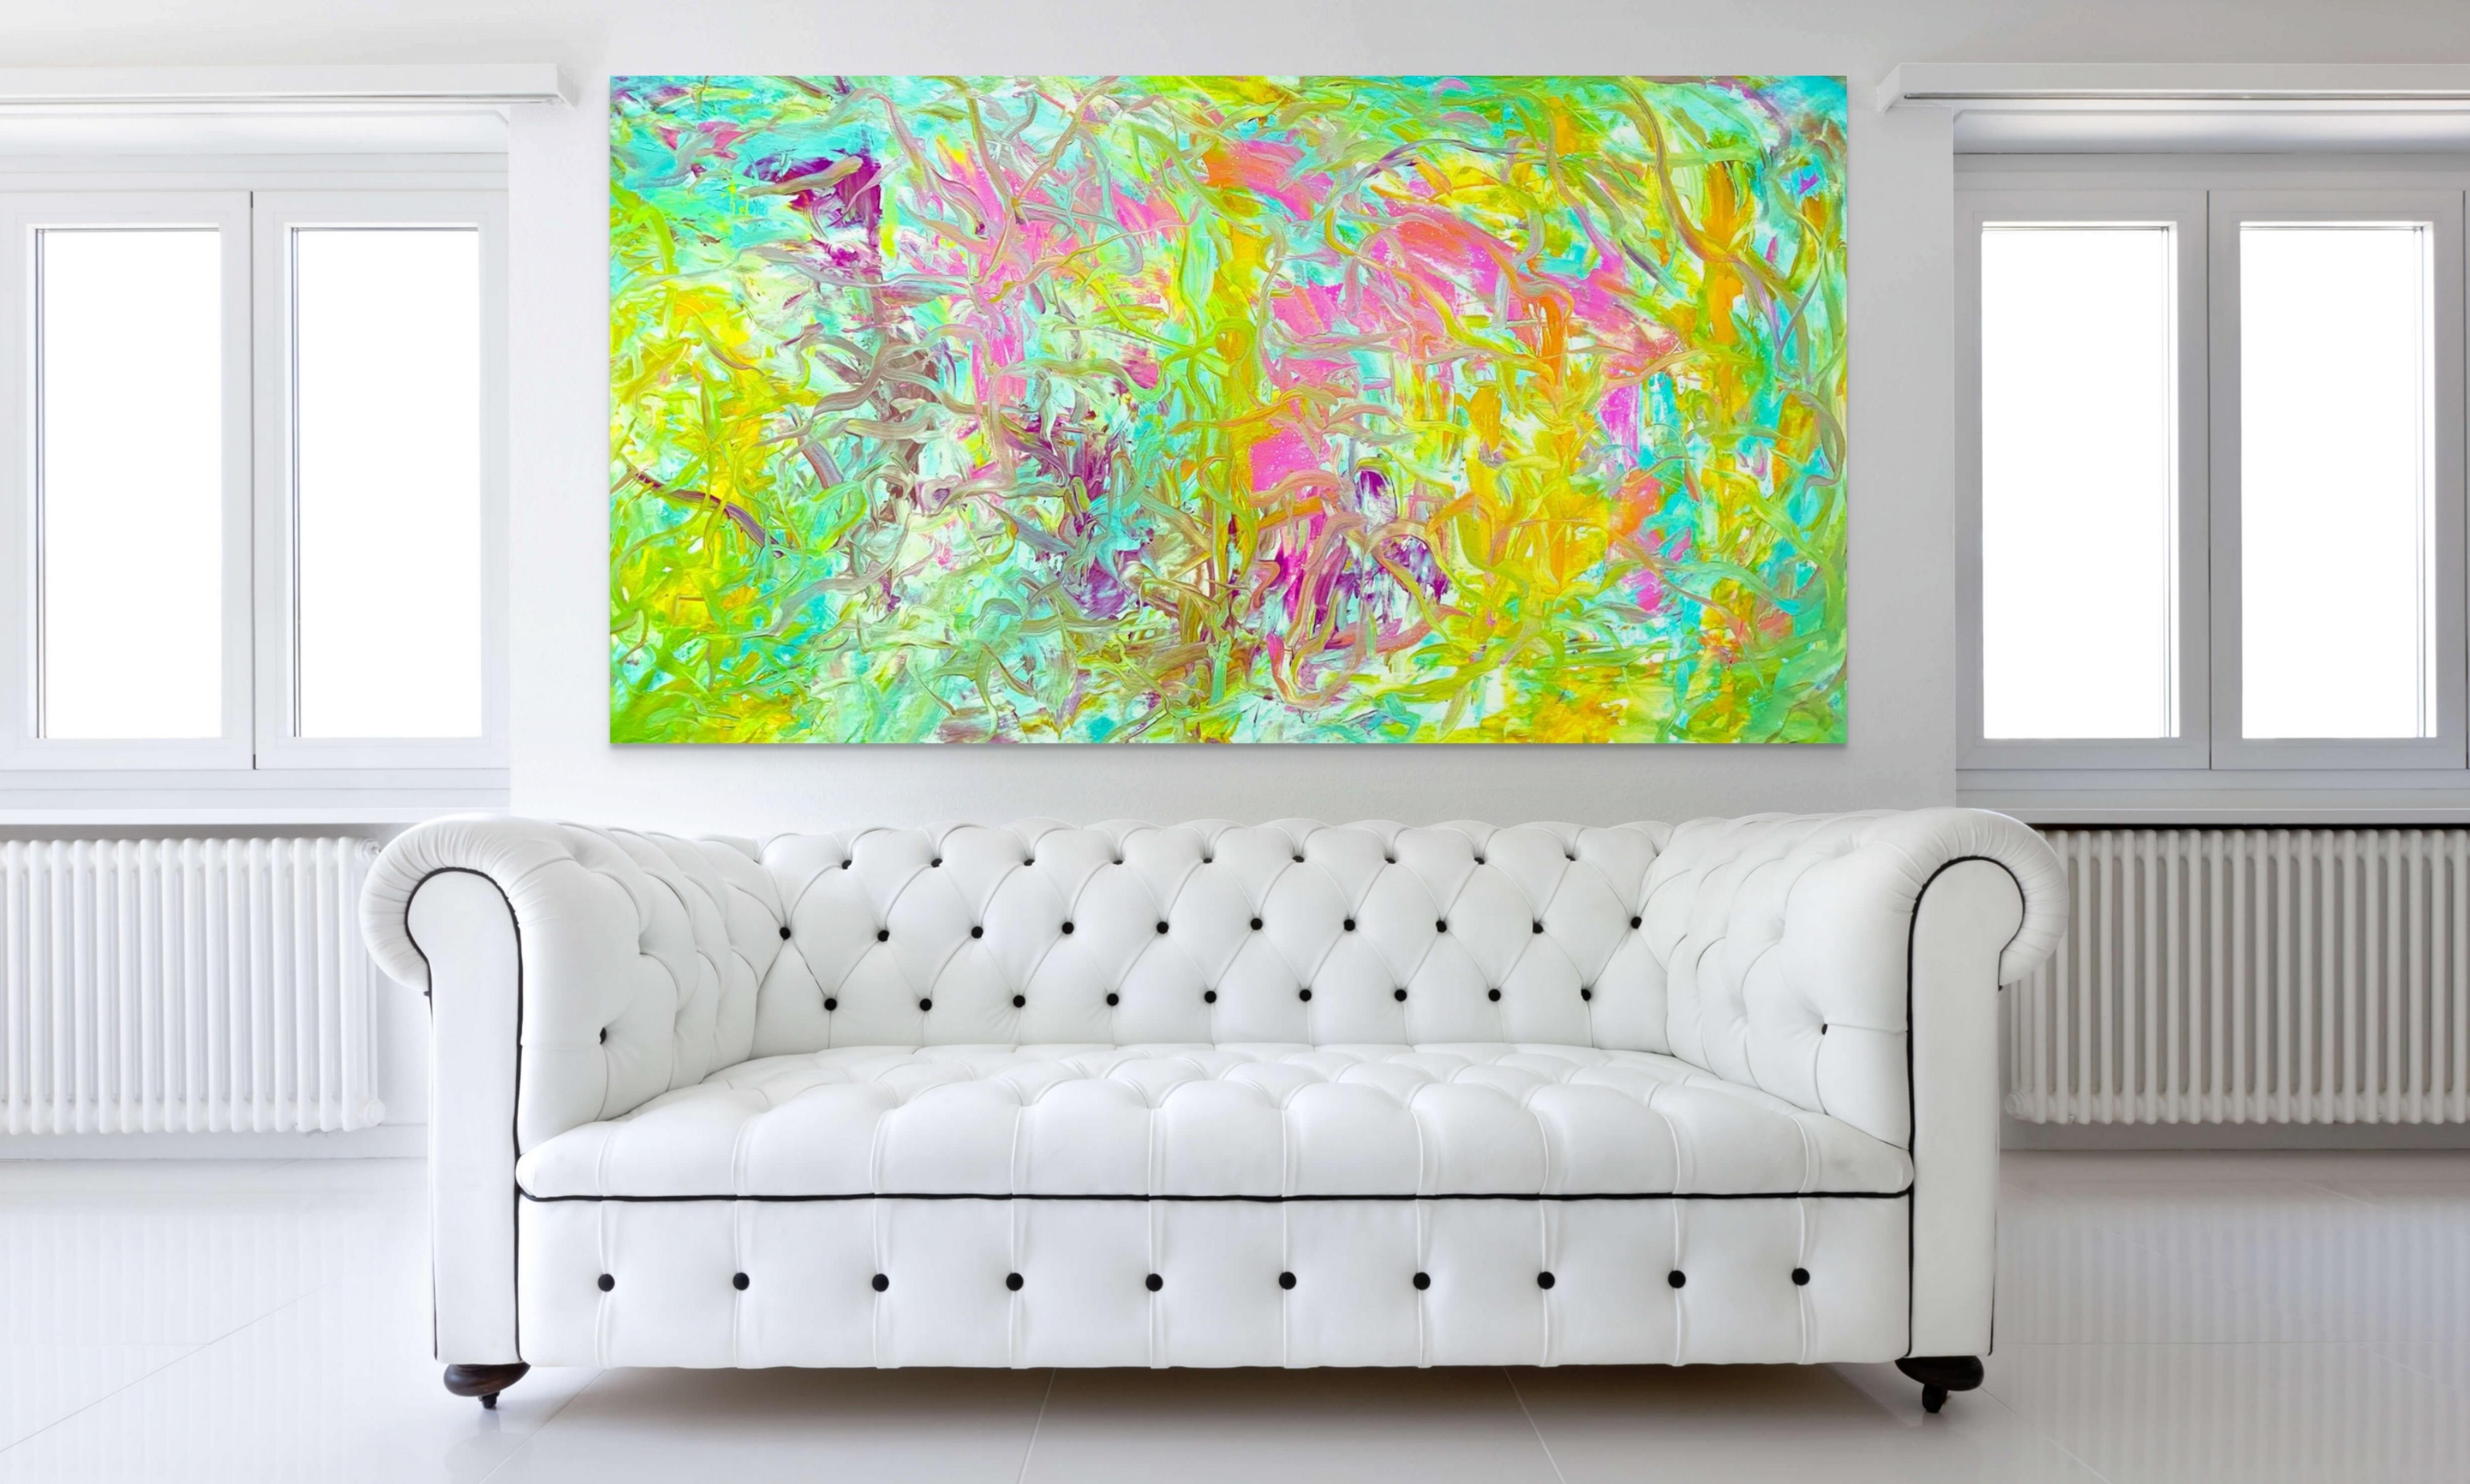 Intricate Belonging - Abstract Expressionist Painting by Estelle Asmodelle